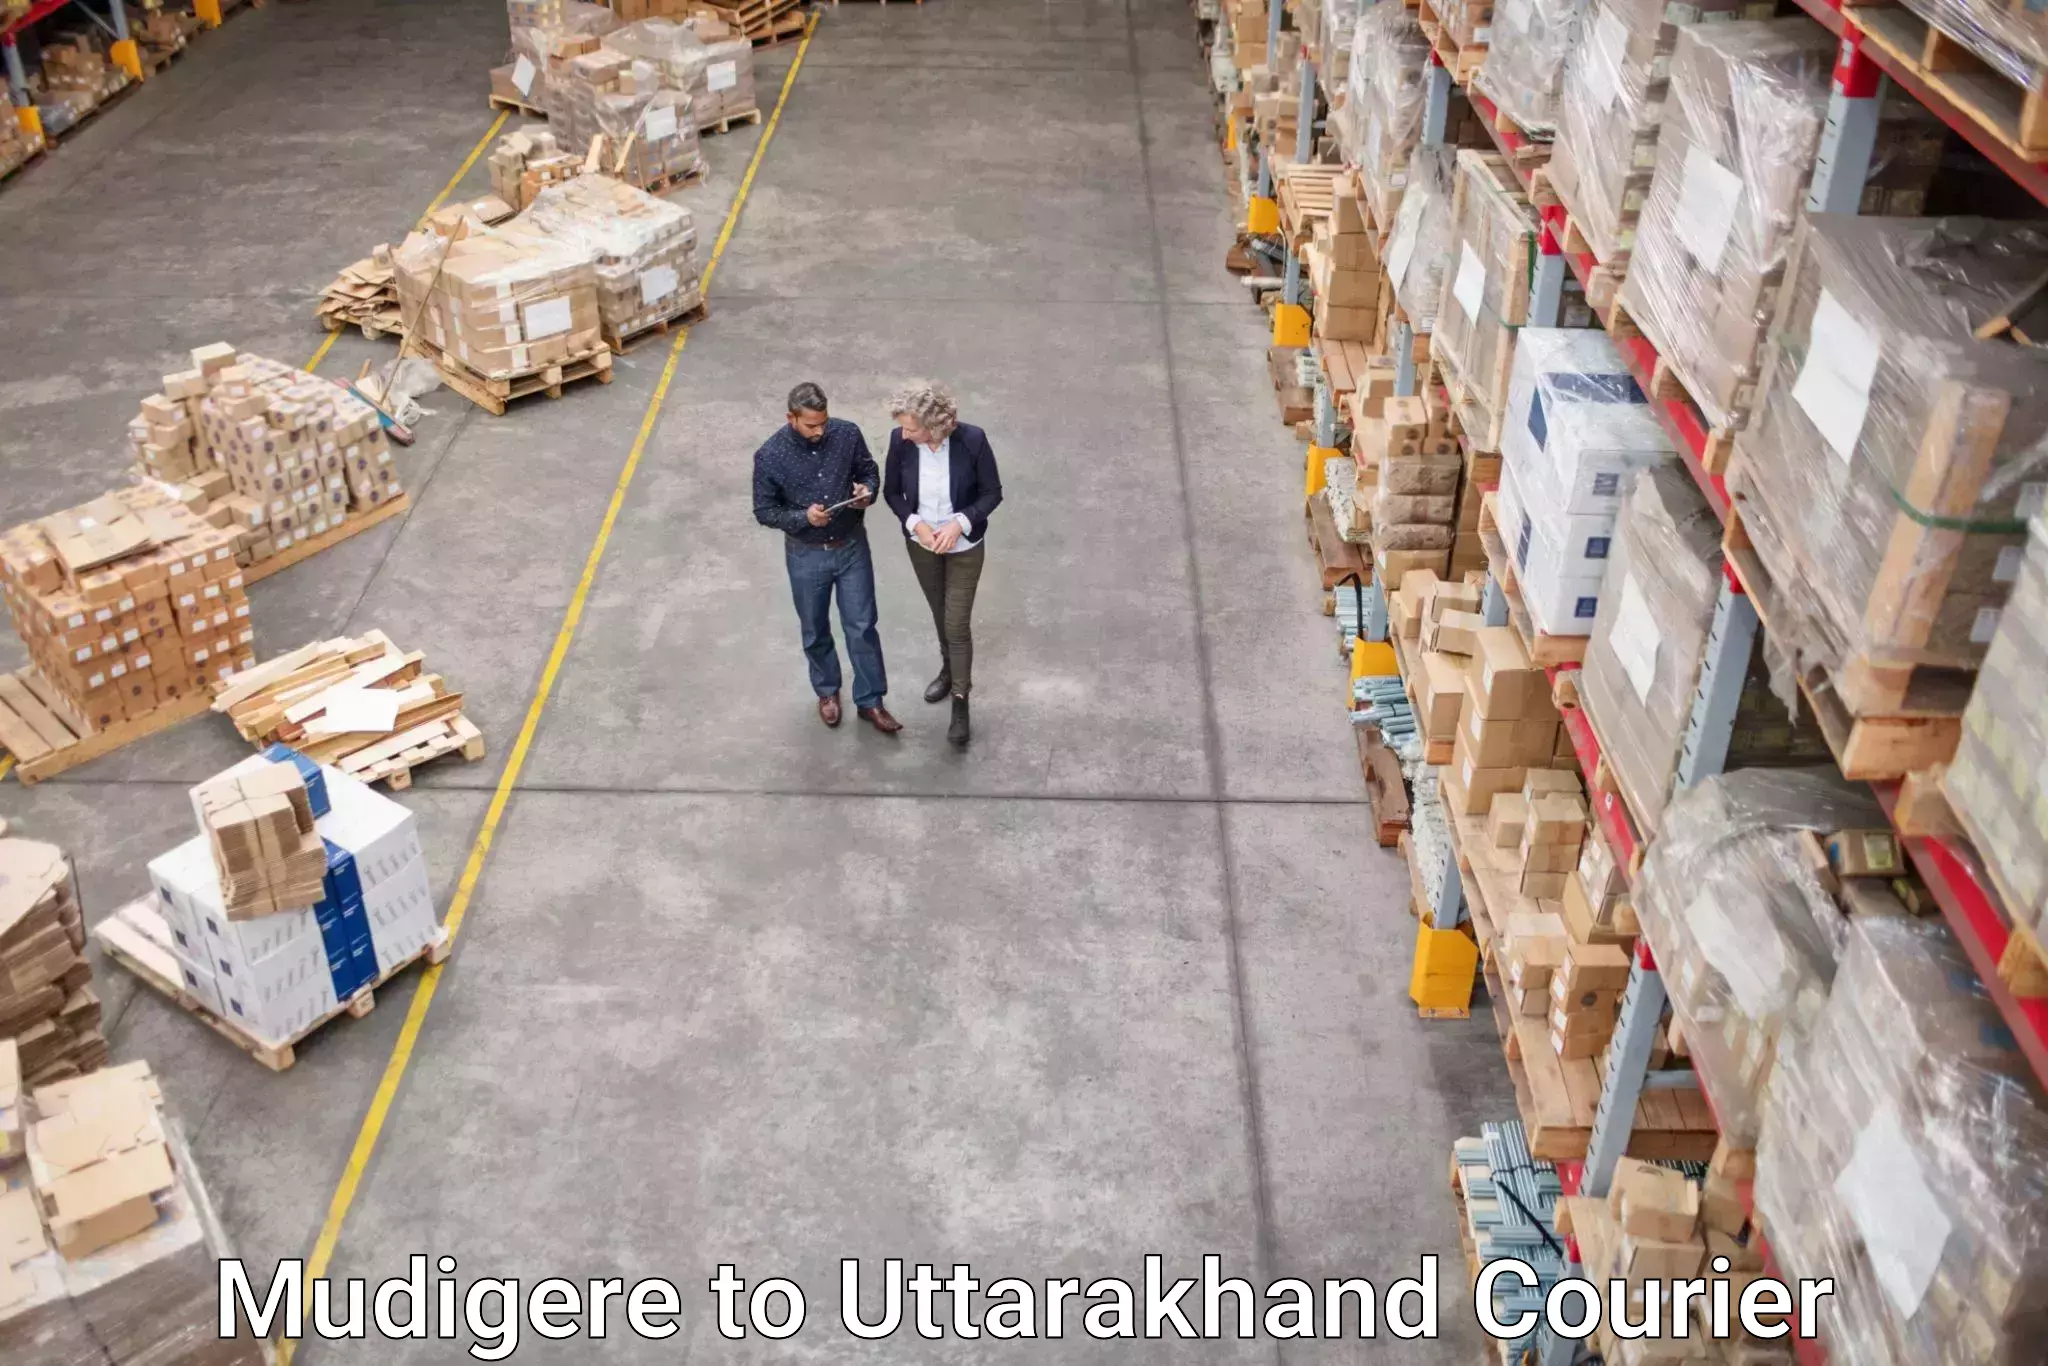 High-priority parcel service Mudigere to Mussoorie